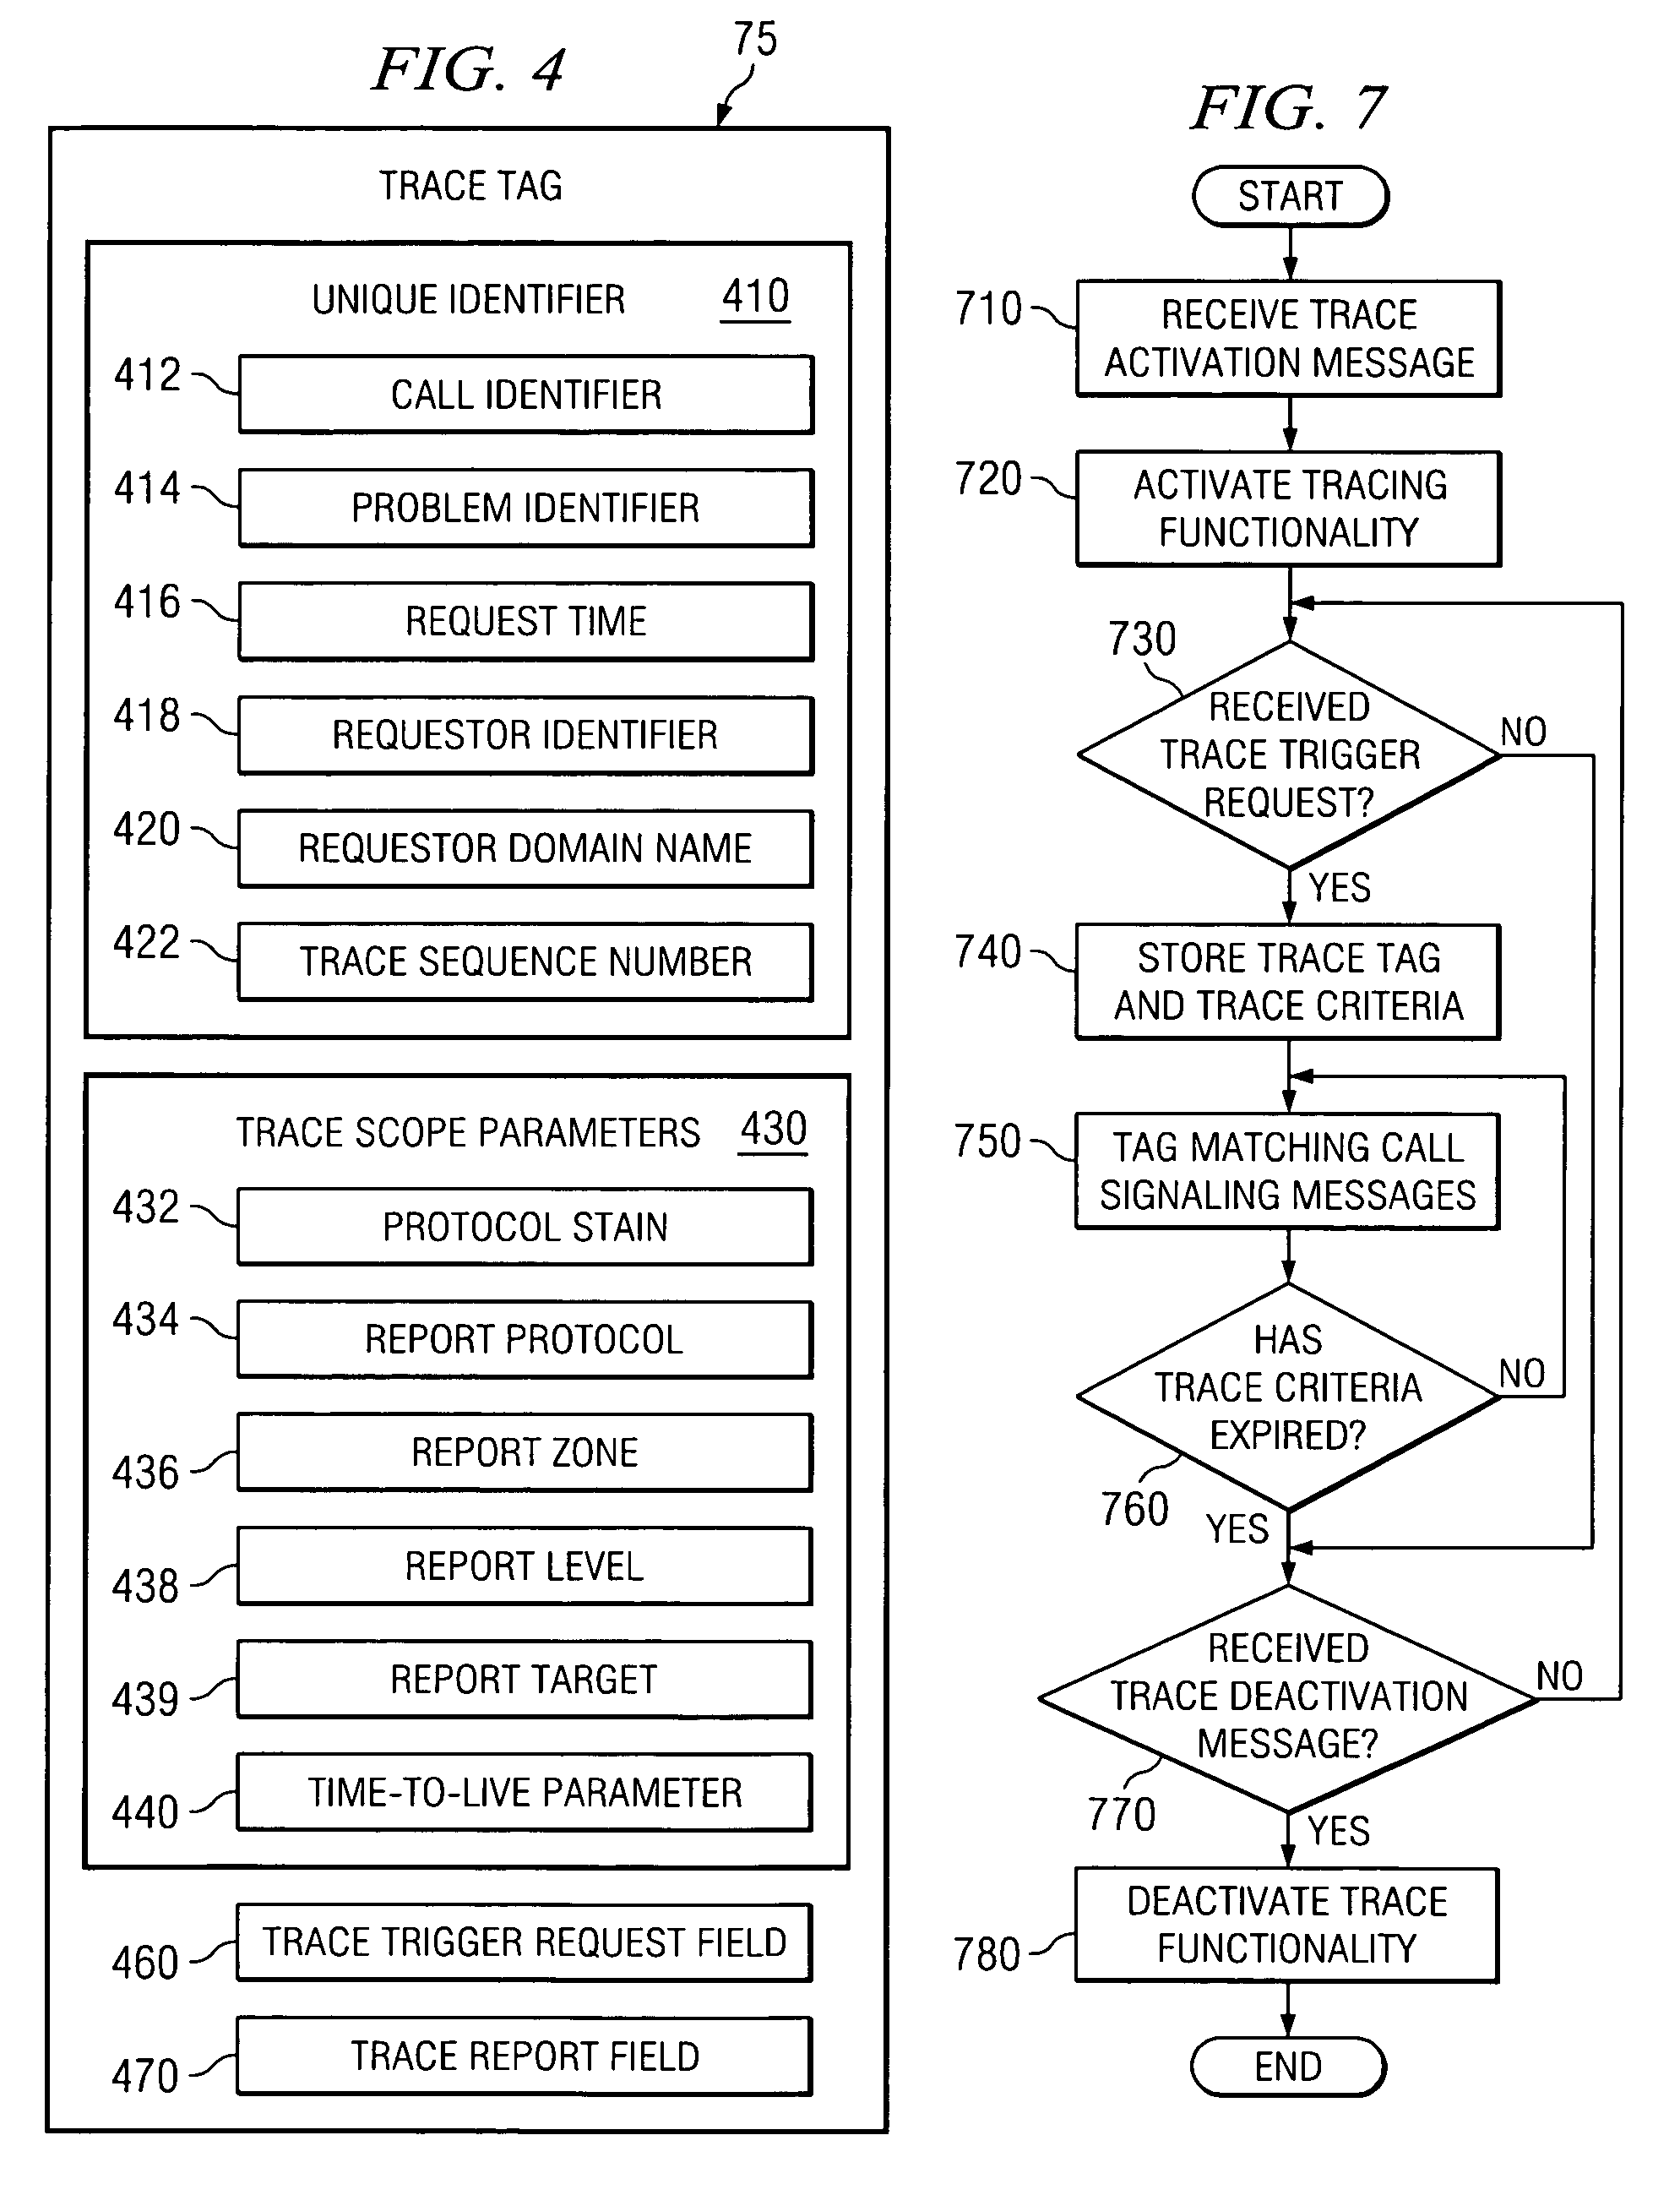 System and method for end-to-end communications tracing